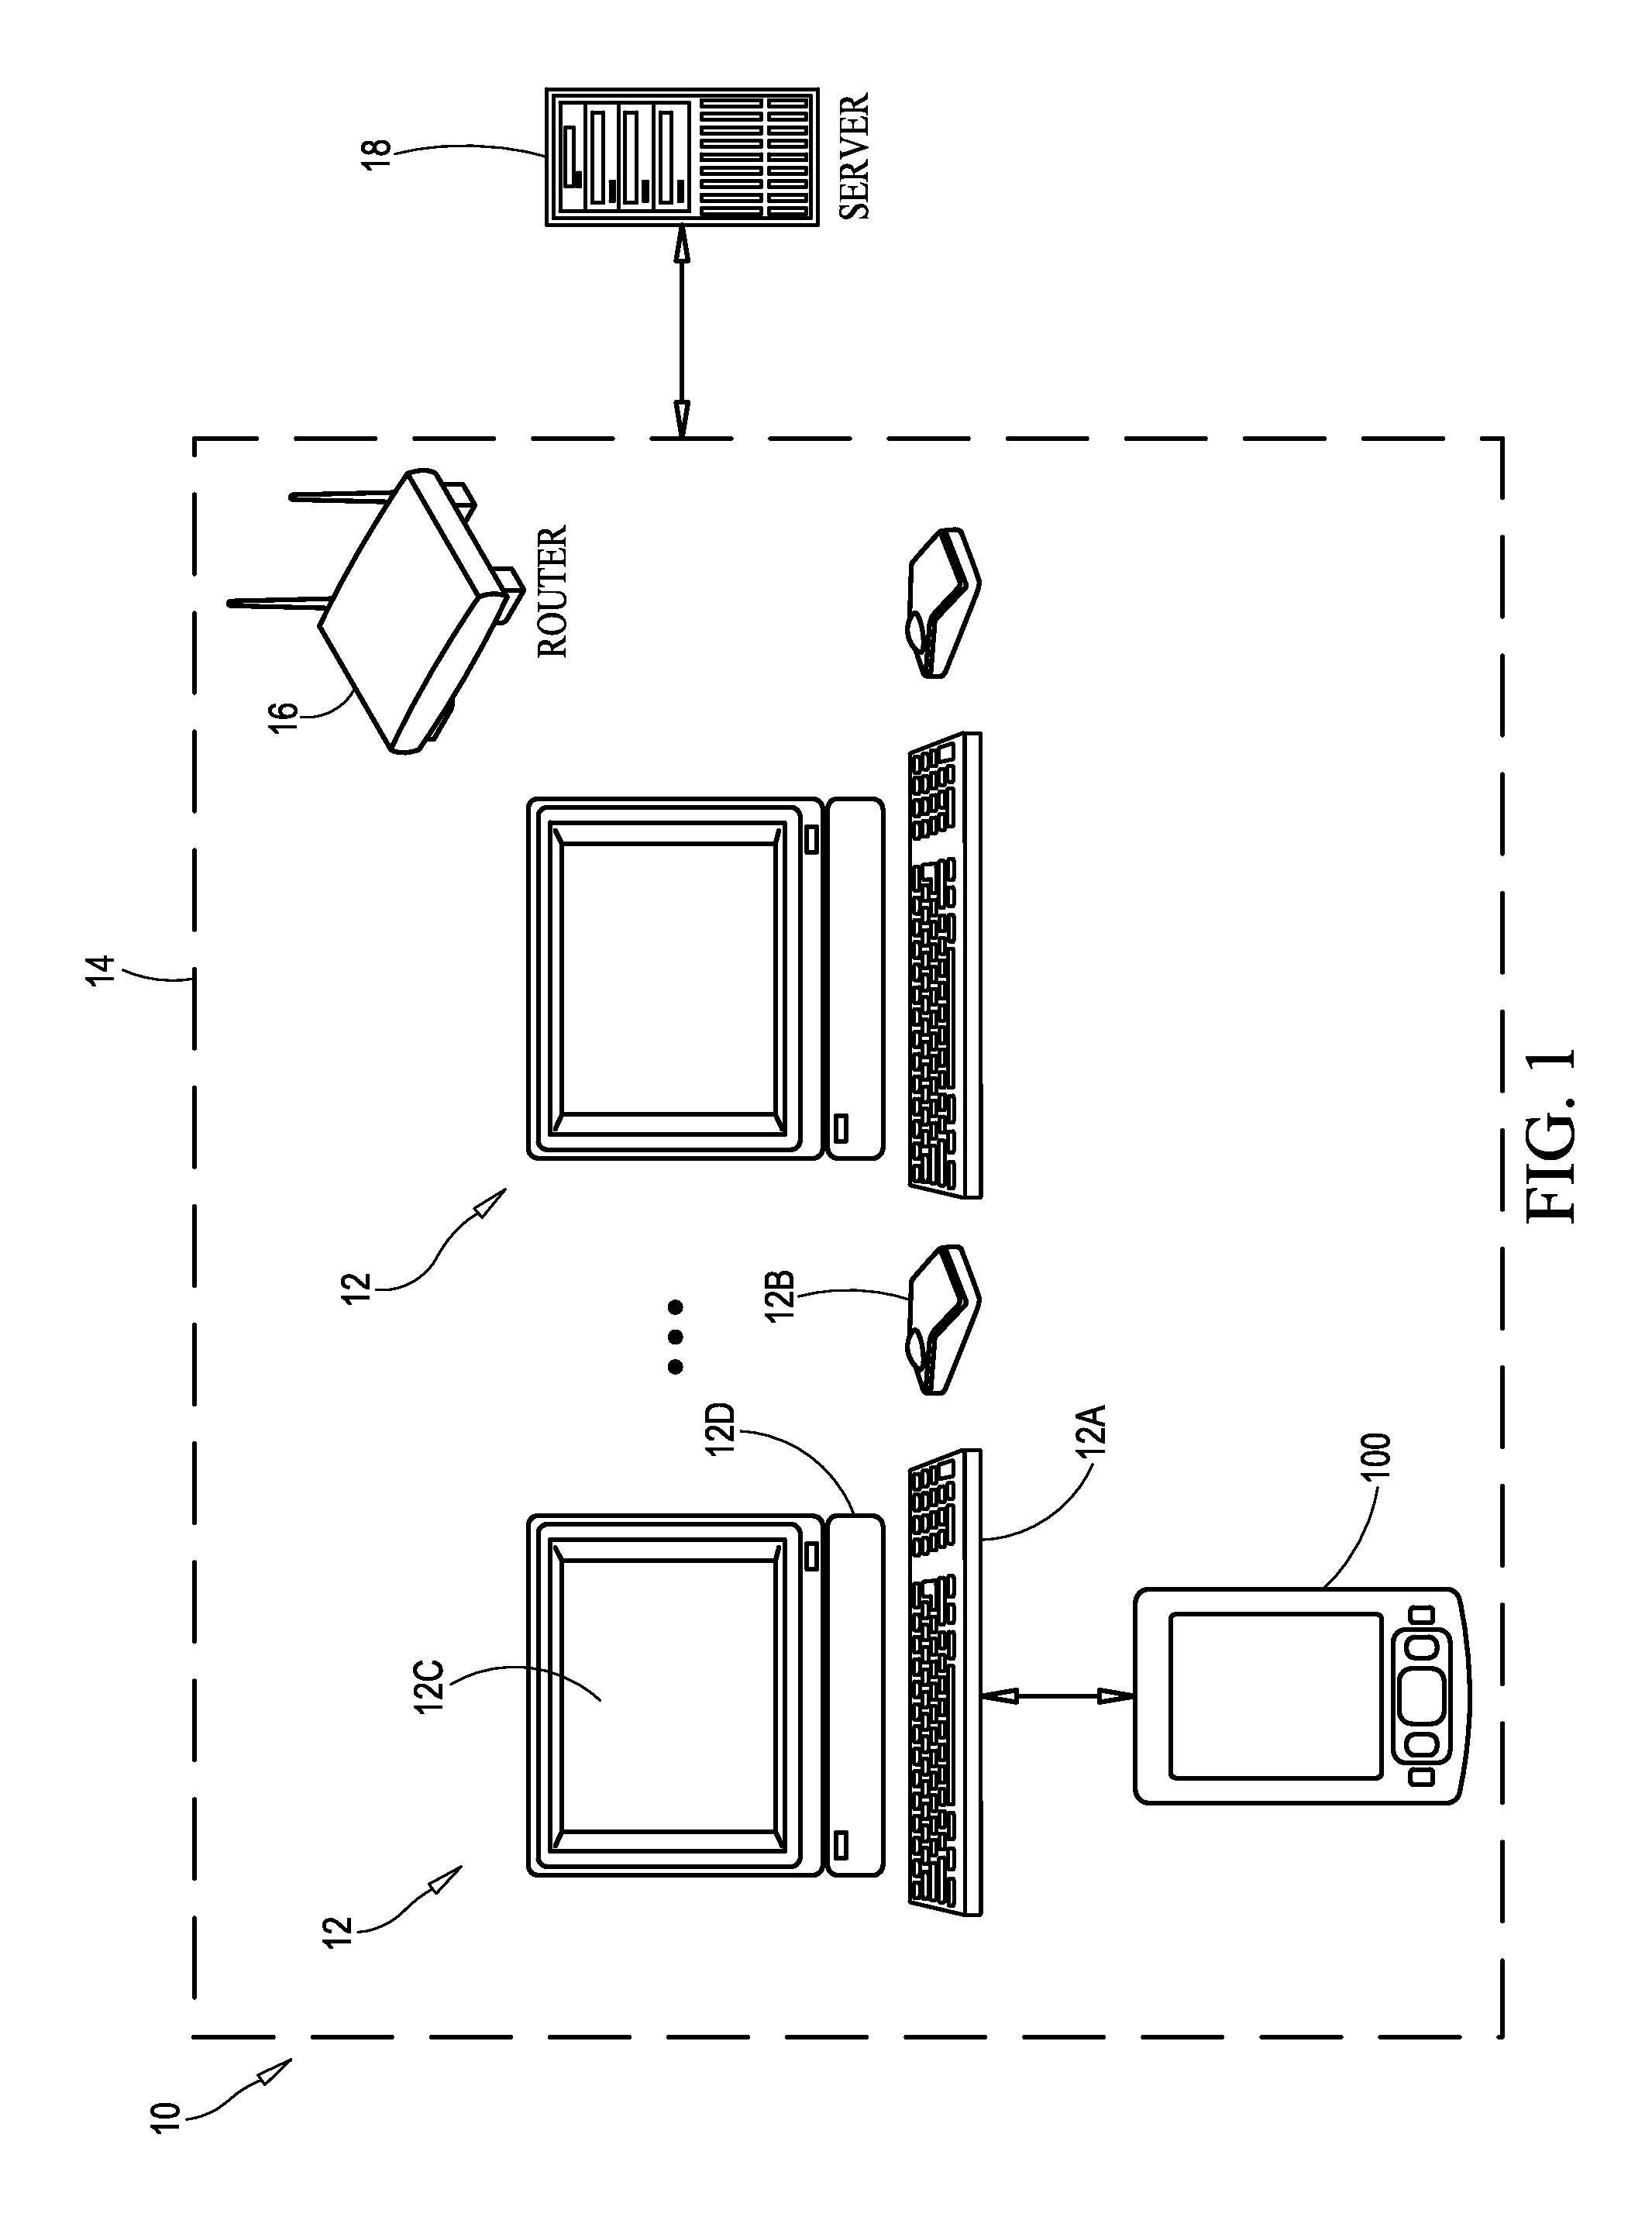 System architecture and method for secure web browsing using public computers